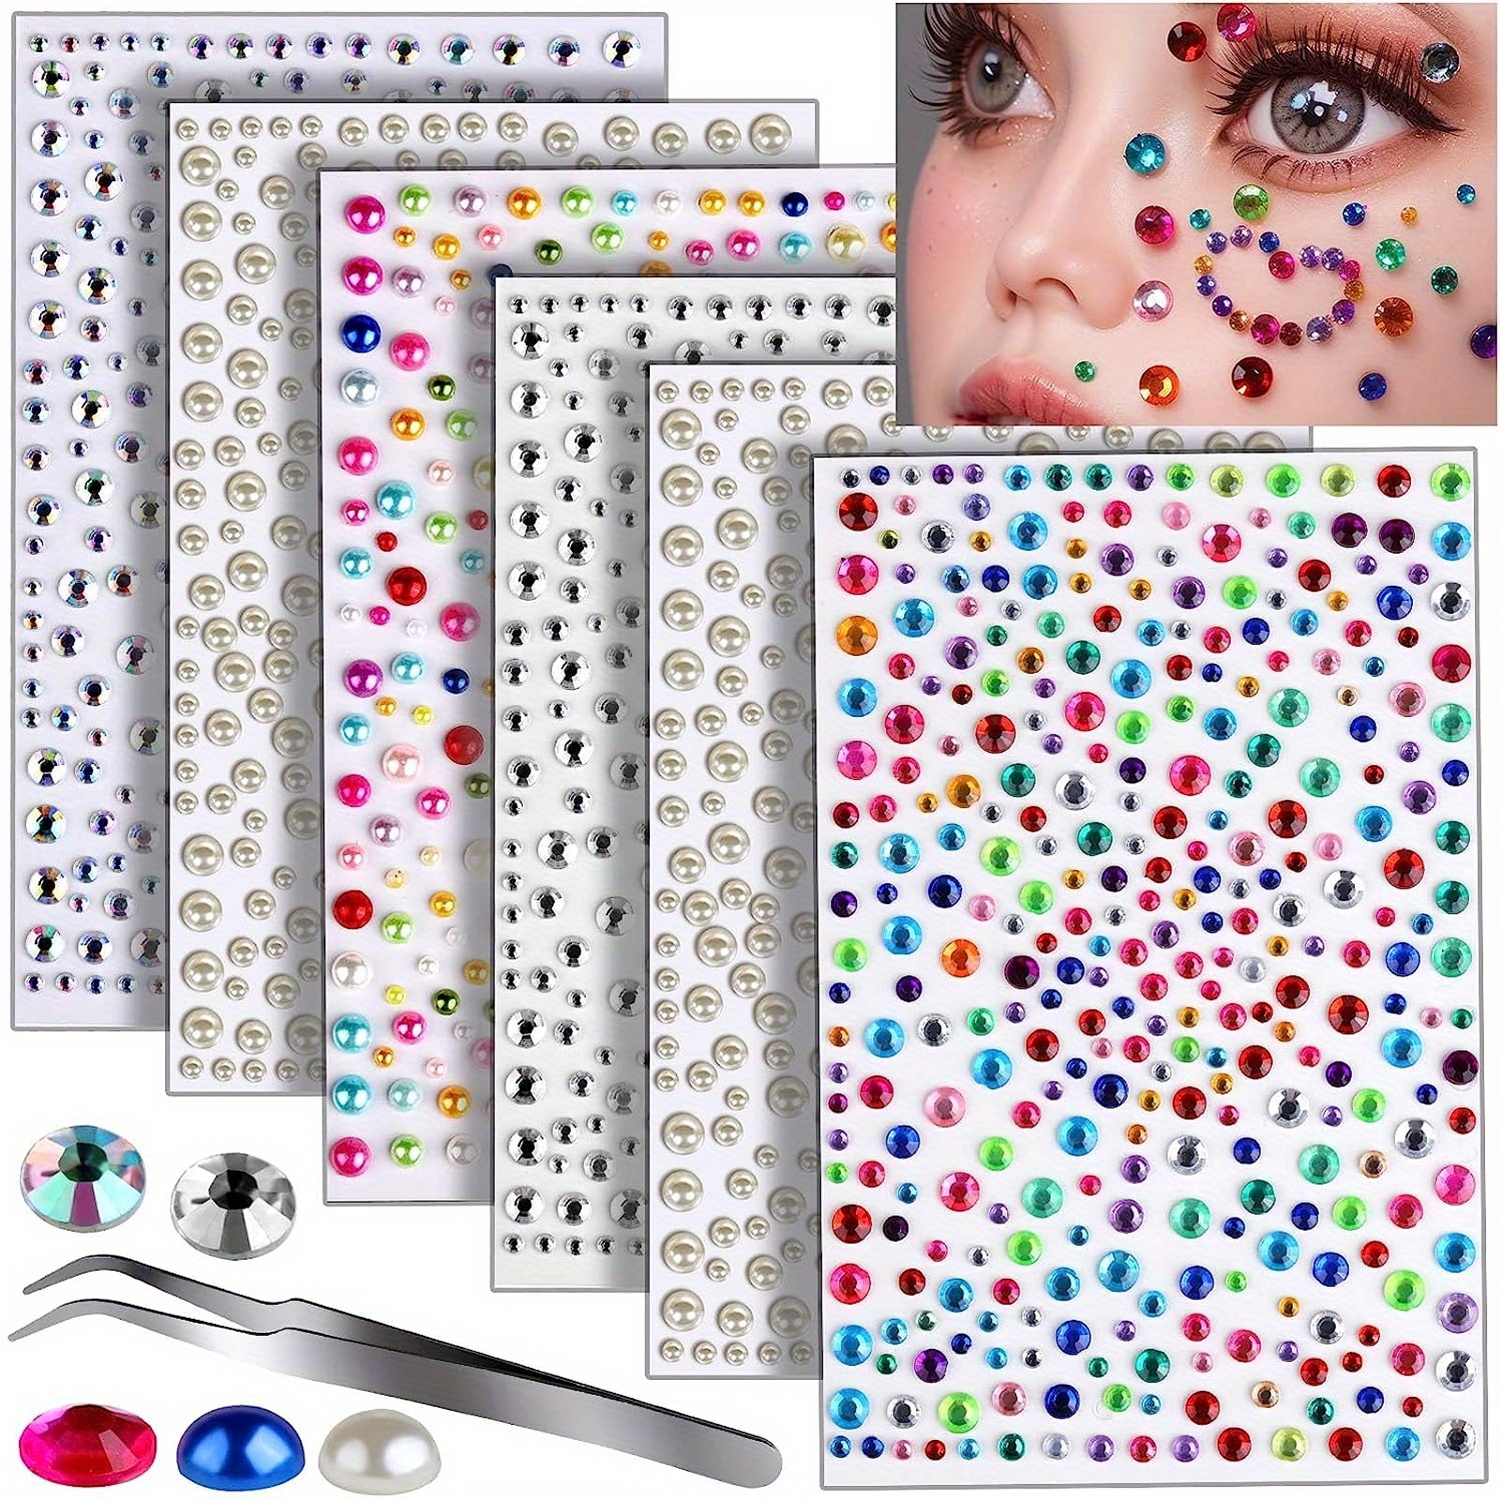  NOOEPC Self Adhesive Hair Gems and Hair Pearls, Face Pearls  and Jewels Stickers for Makeup,Hair Diamonds,Hair Pearls Stick On,Bling  Stickers Rhinestone Self Adhesive for Crafts,Face,Makeup,Eye,Nail : Beauty  & Personal Care